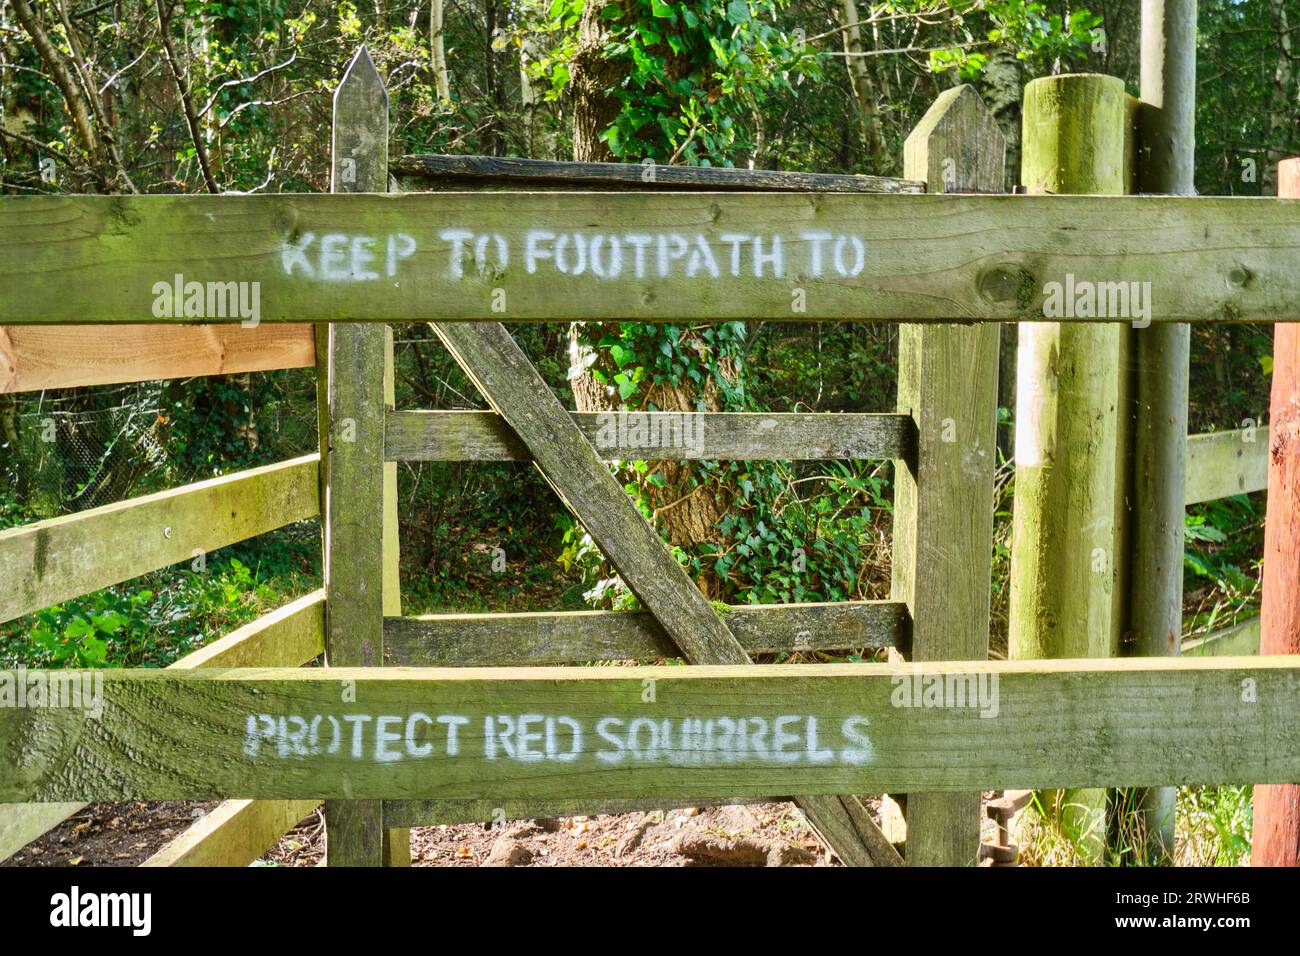 Kissing Gate with sign saying Keep to Footpath To Protect Red Squirrels, at Warwick Moor Wood, near Alglionby, Carlisle, Cumbria Stock Photo